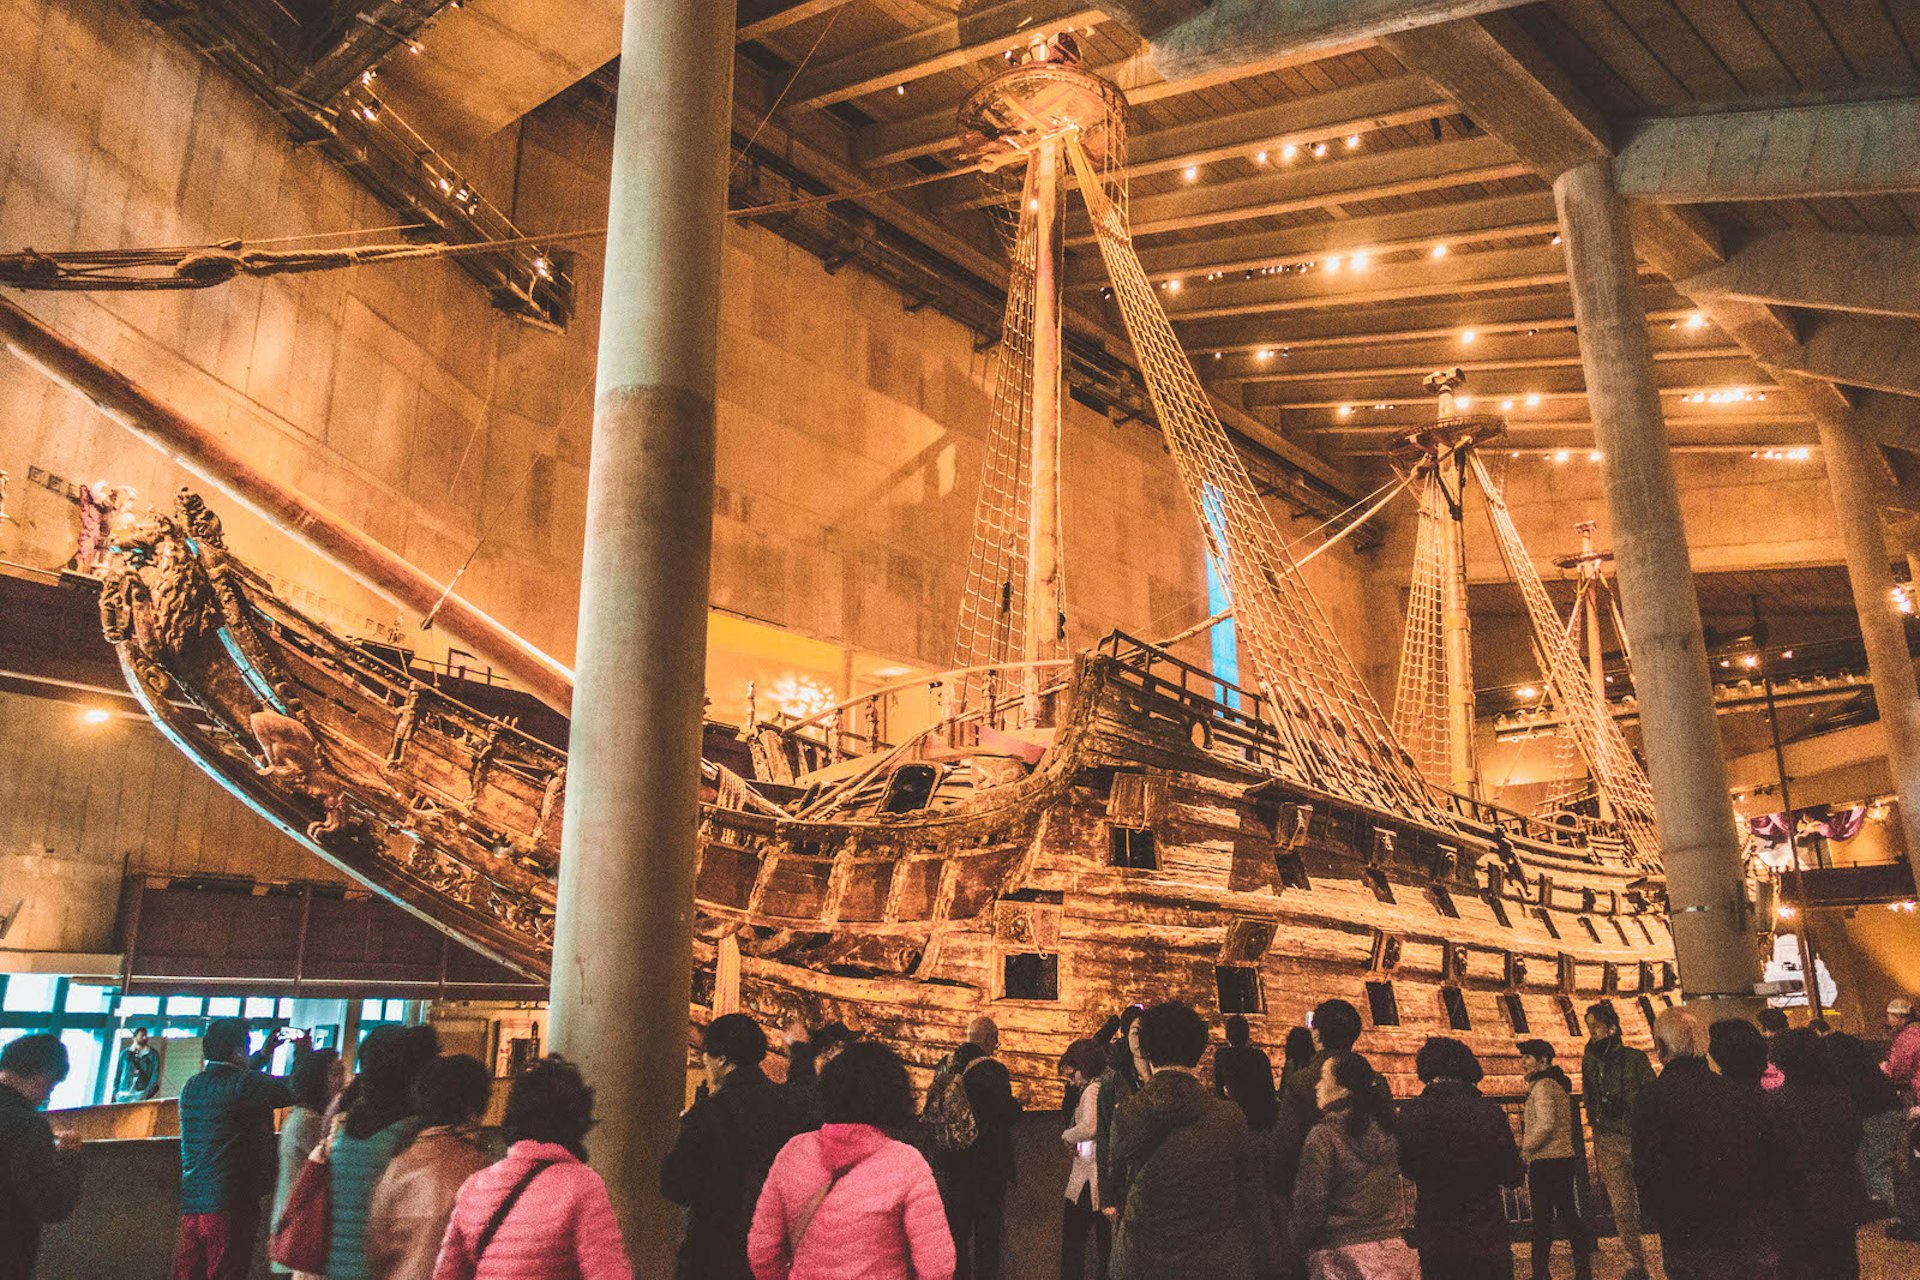 Inside Vasamuseet, crowds are gathered around the ill-fated 17th-century warship © Megan & Whitney Bacon-Evans / Lonely Planet